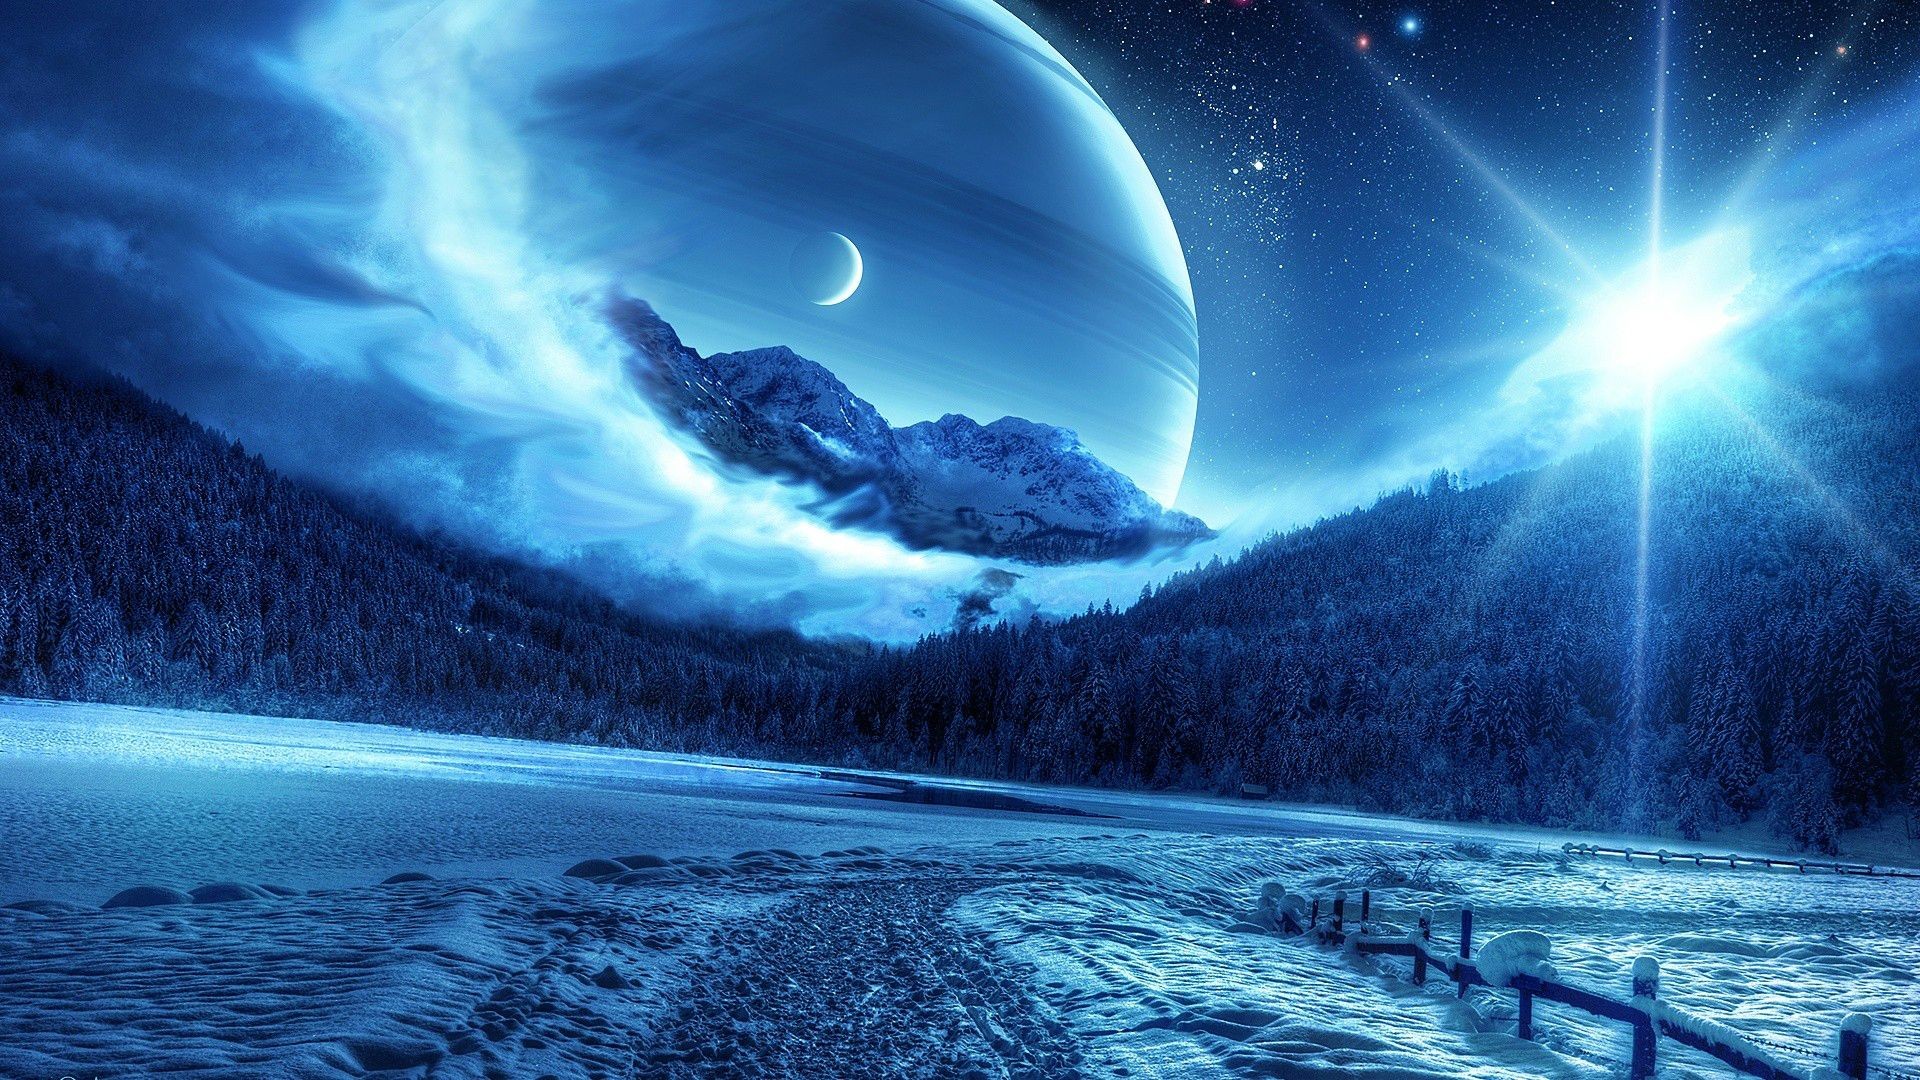 General 1920x1080 nature photo manipulation planet Moon landscape snow mist stars night starry night fence path pine trees forest digital art sky winter cold outdoors